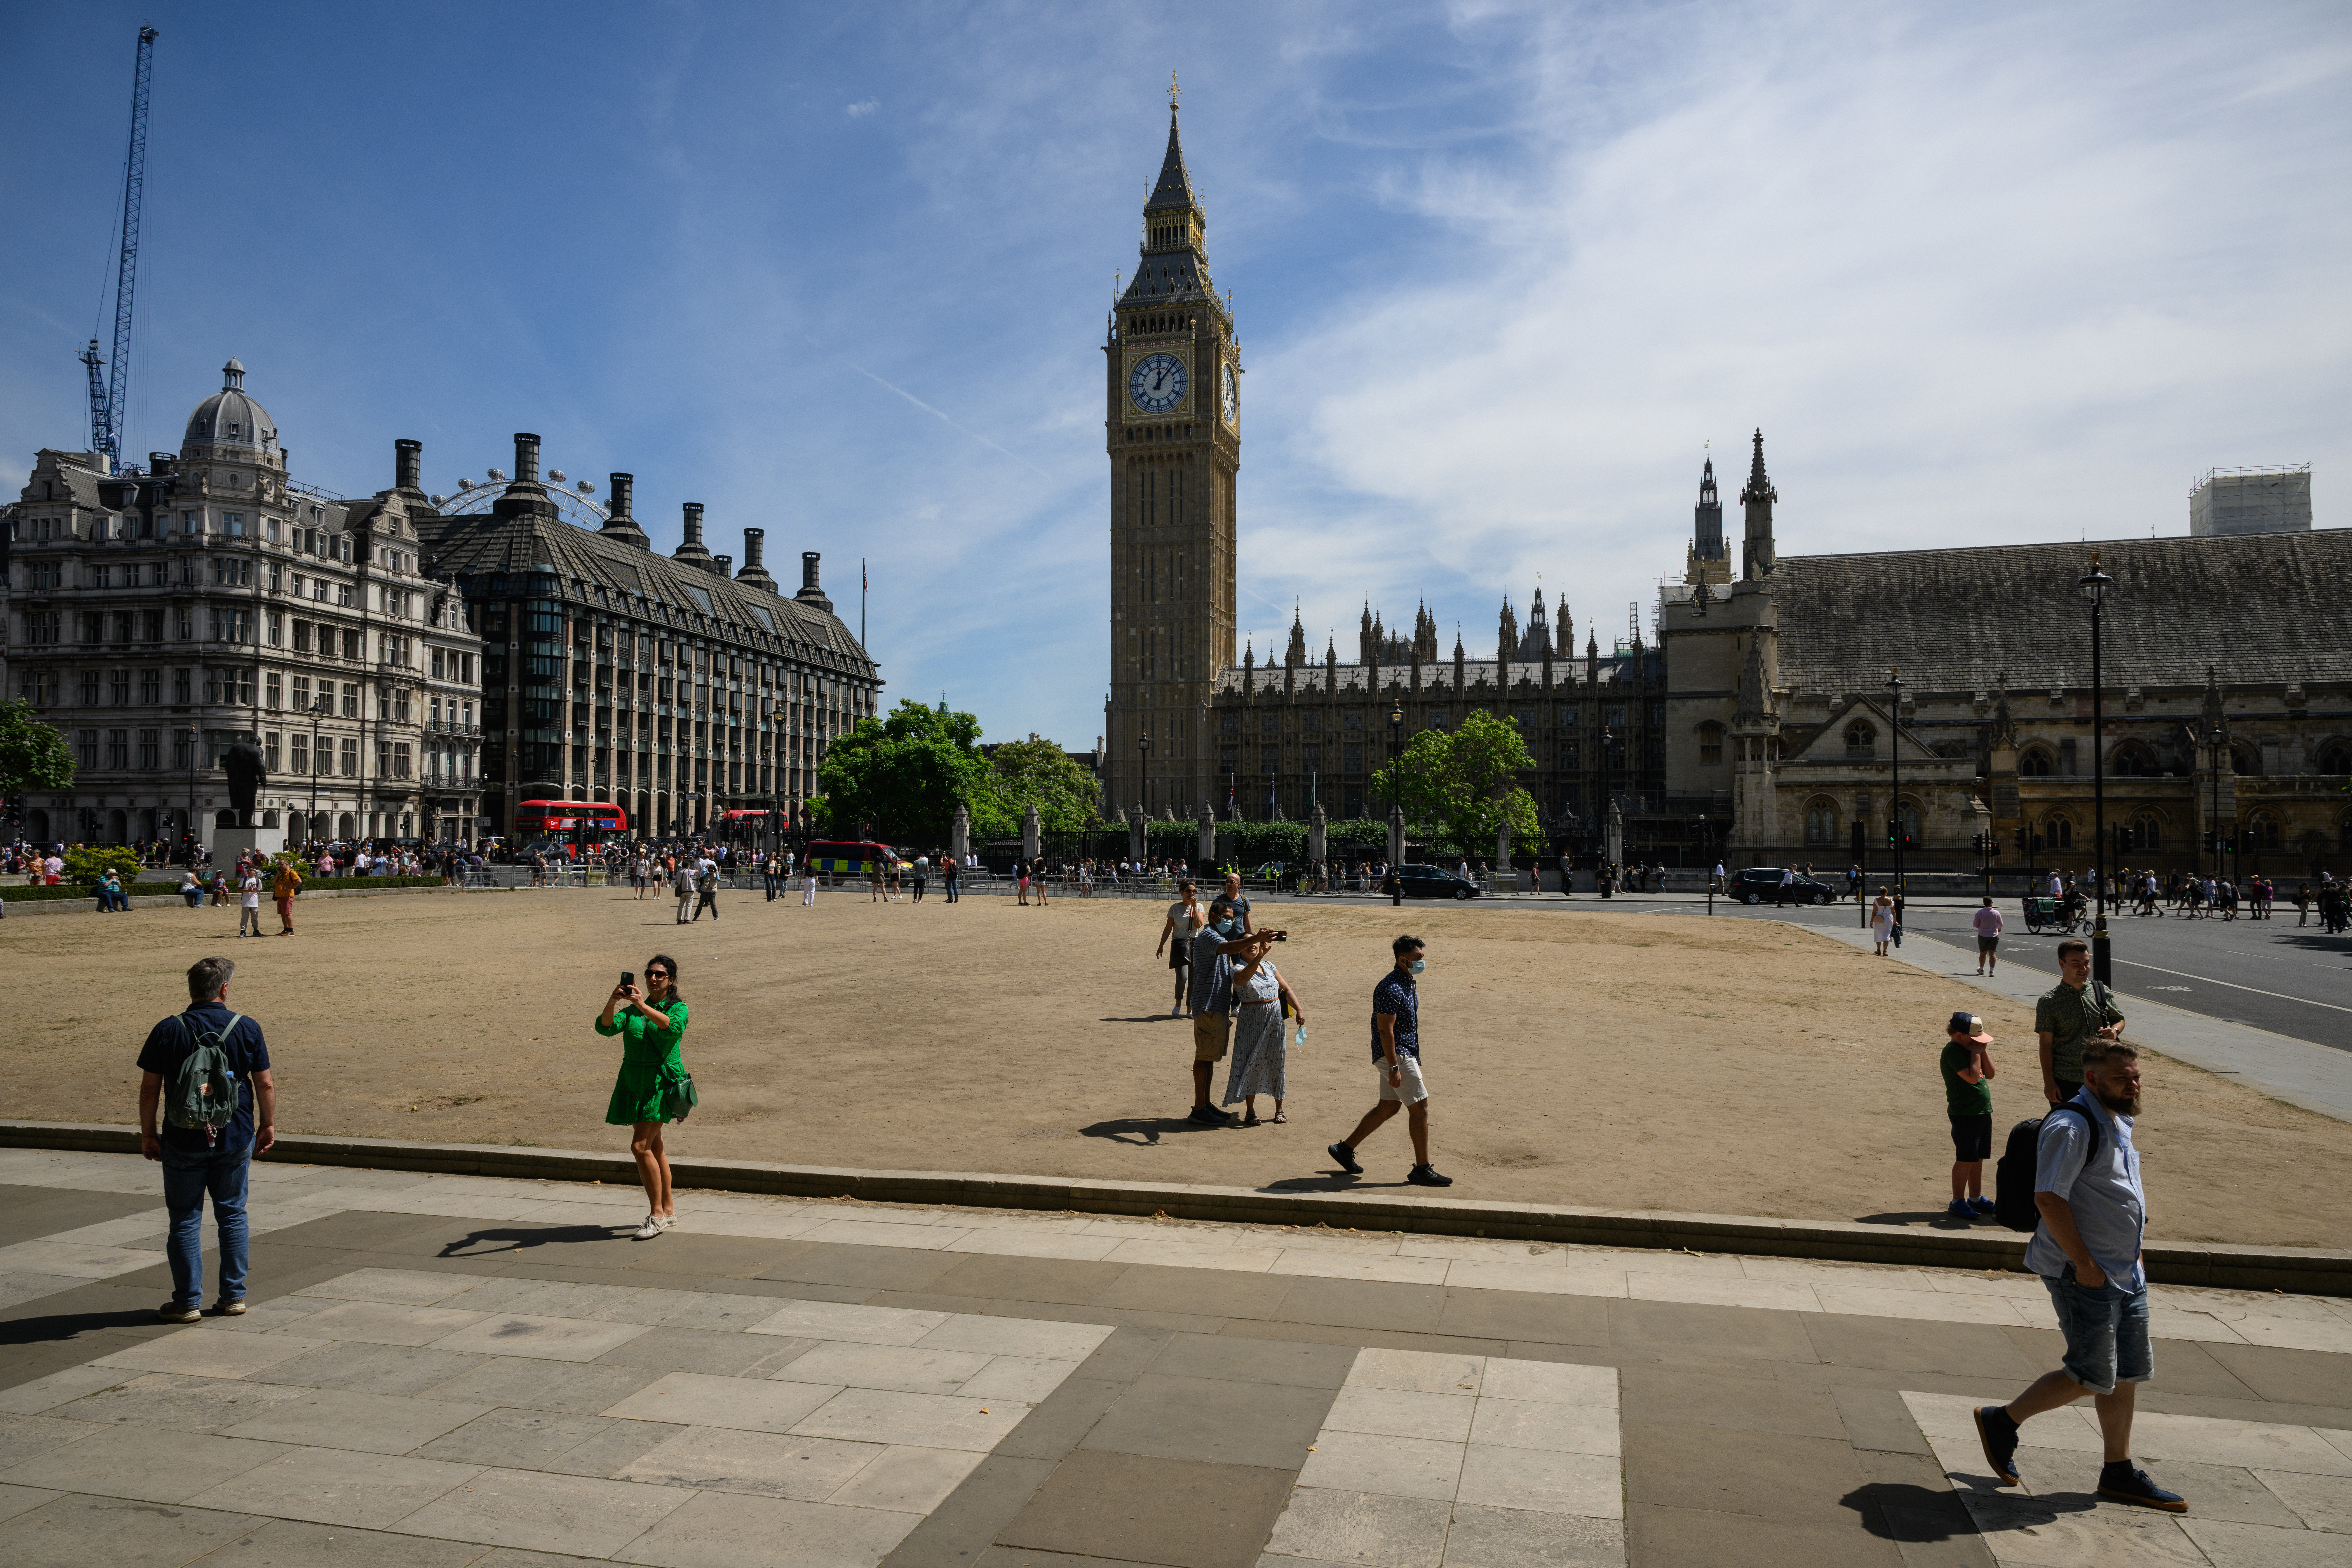 Tourists walk on the sun-baked Parliament Square on July 14, 2022 in London, England. 